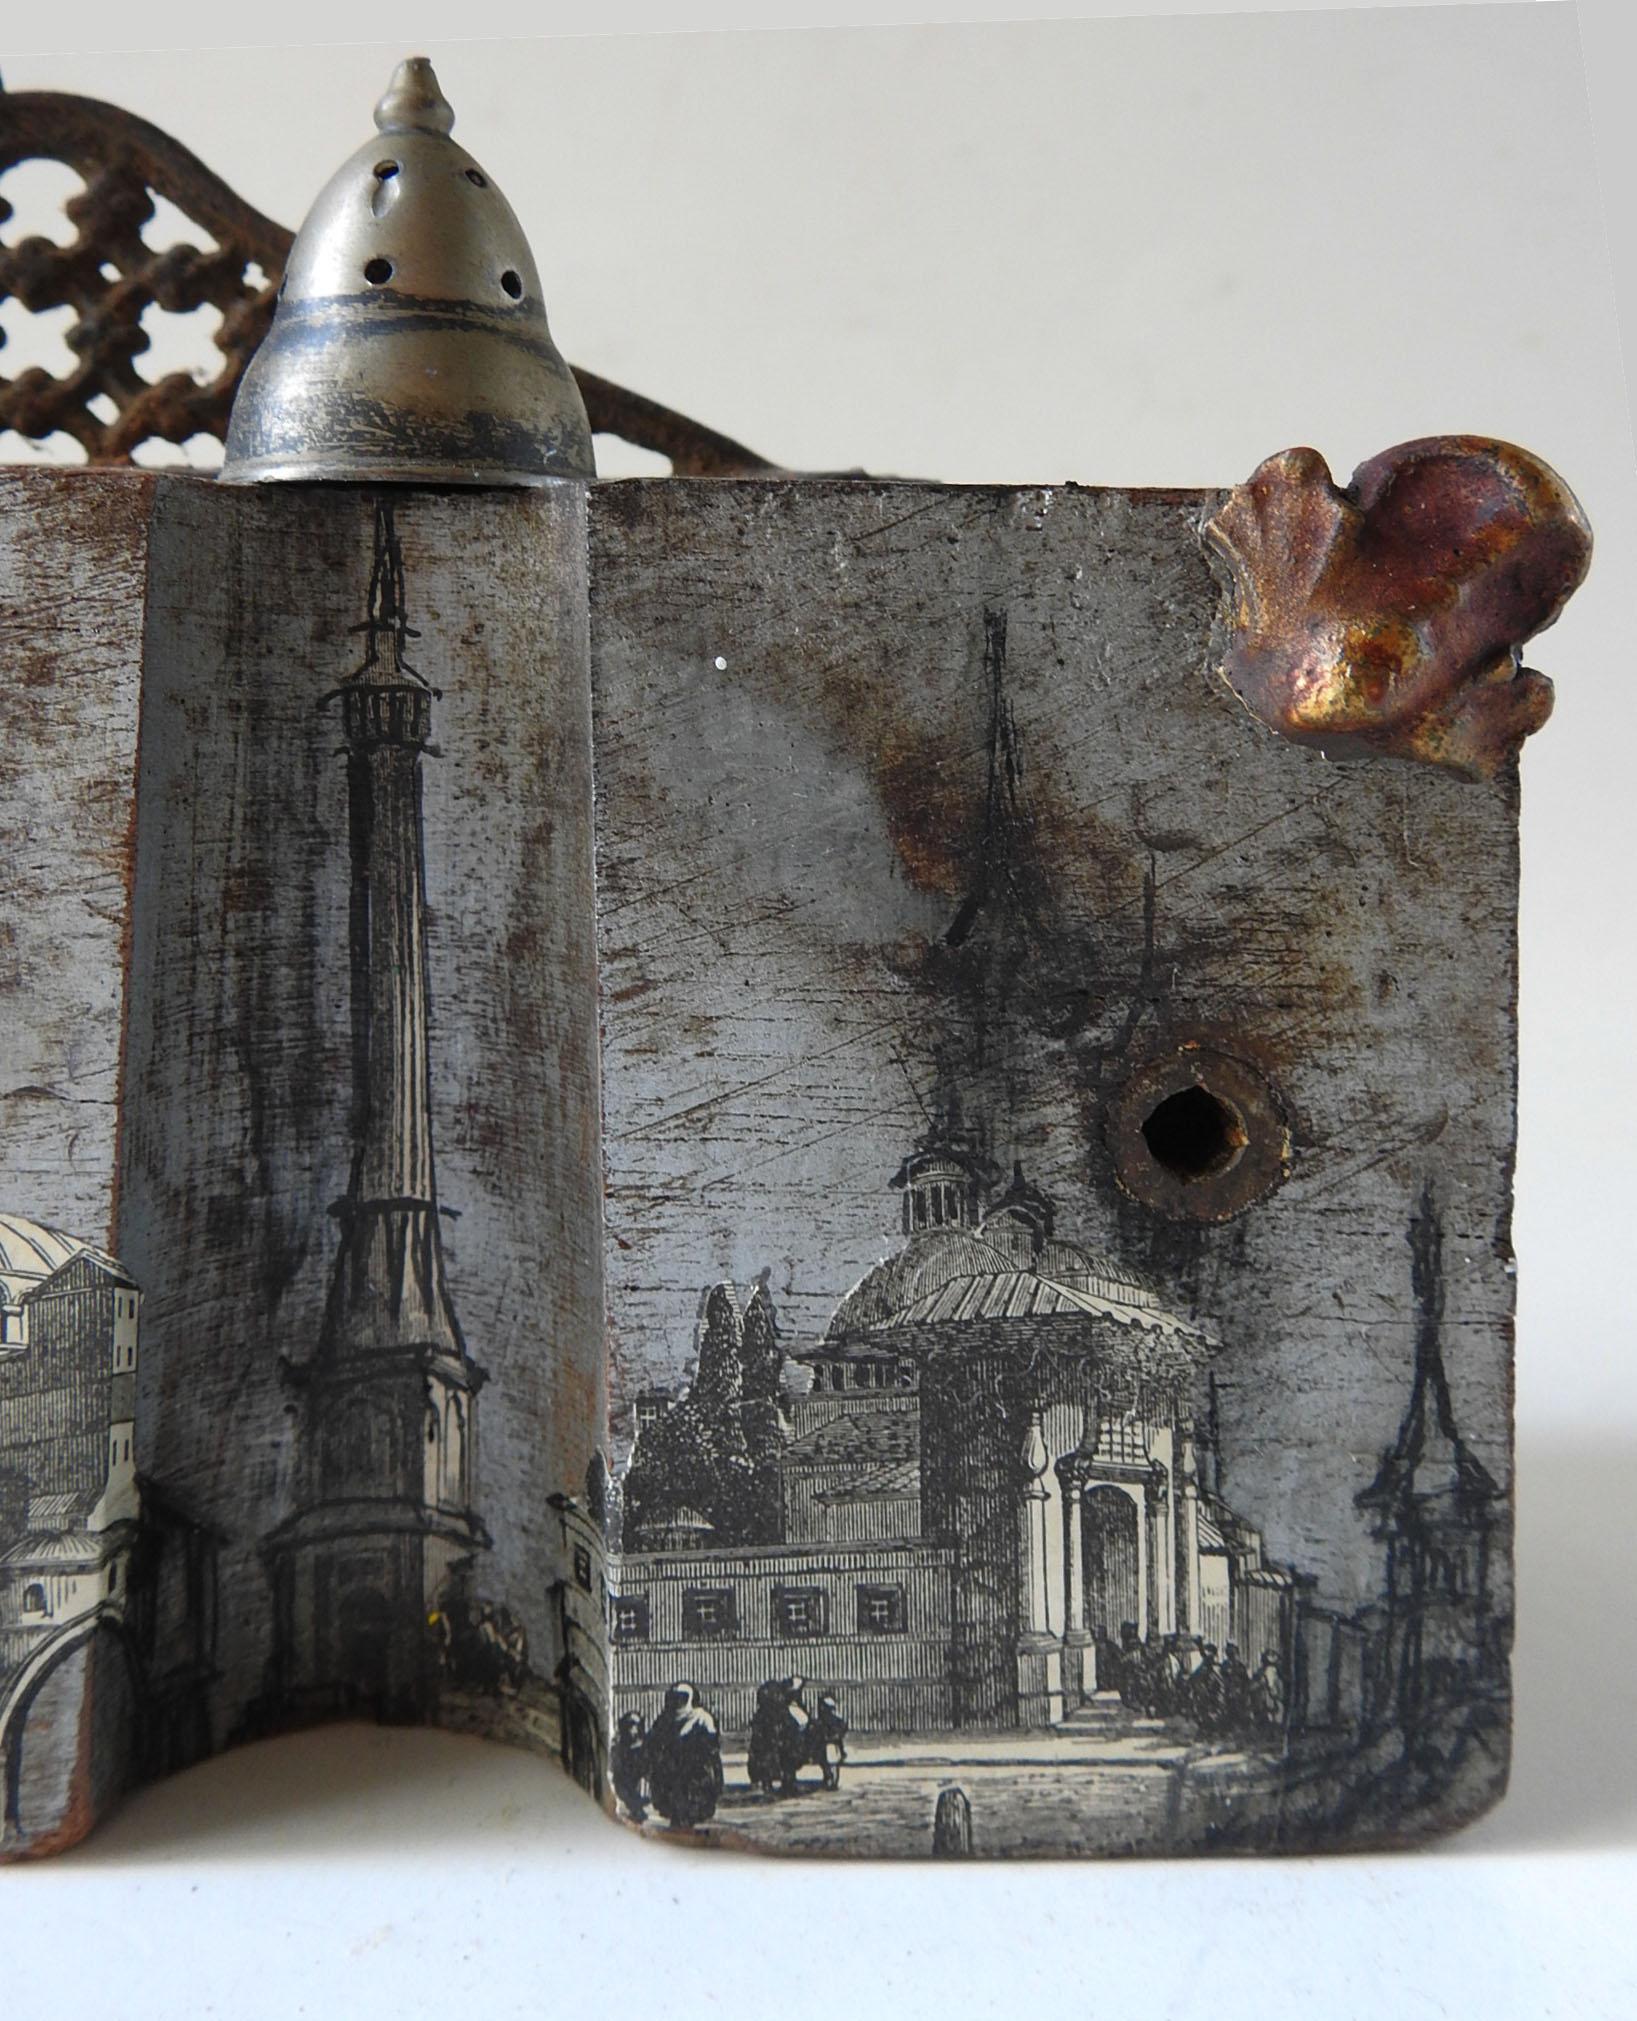 Hand-Crafted Mixed Media Sculpture Architectural Assemblage For Sale